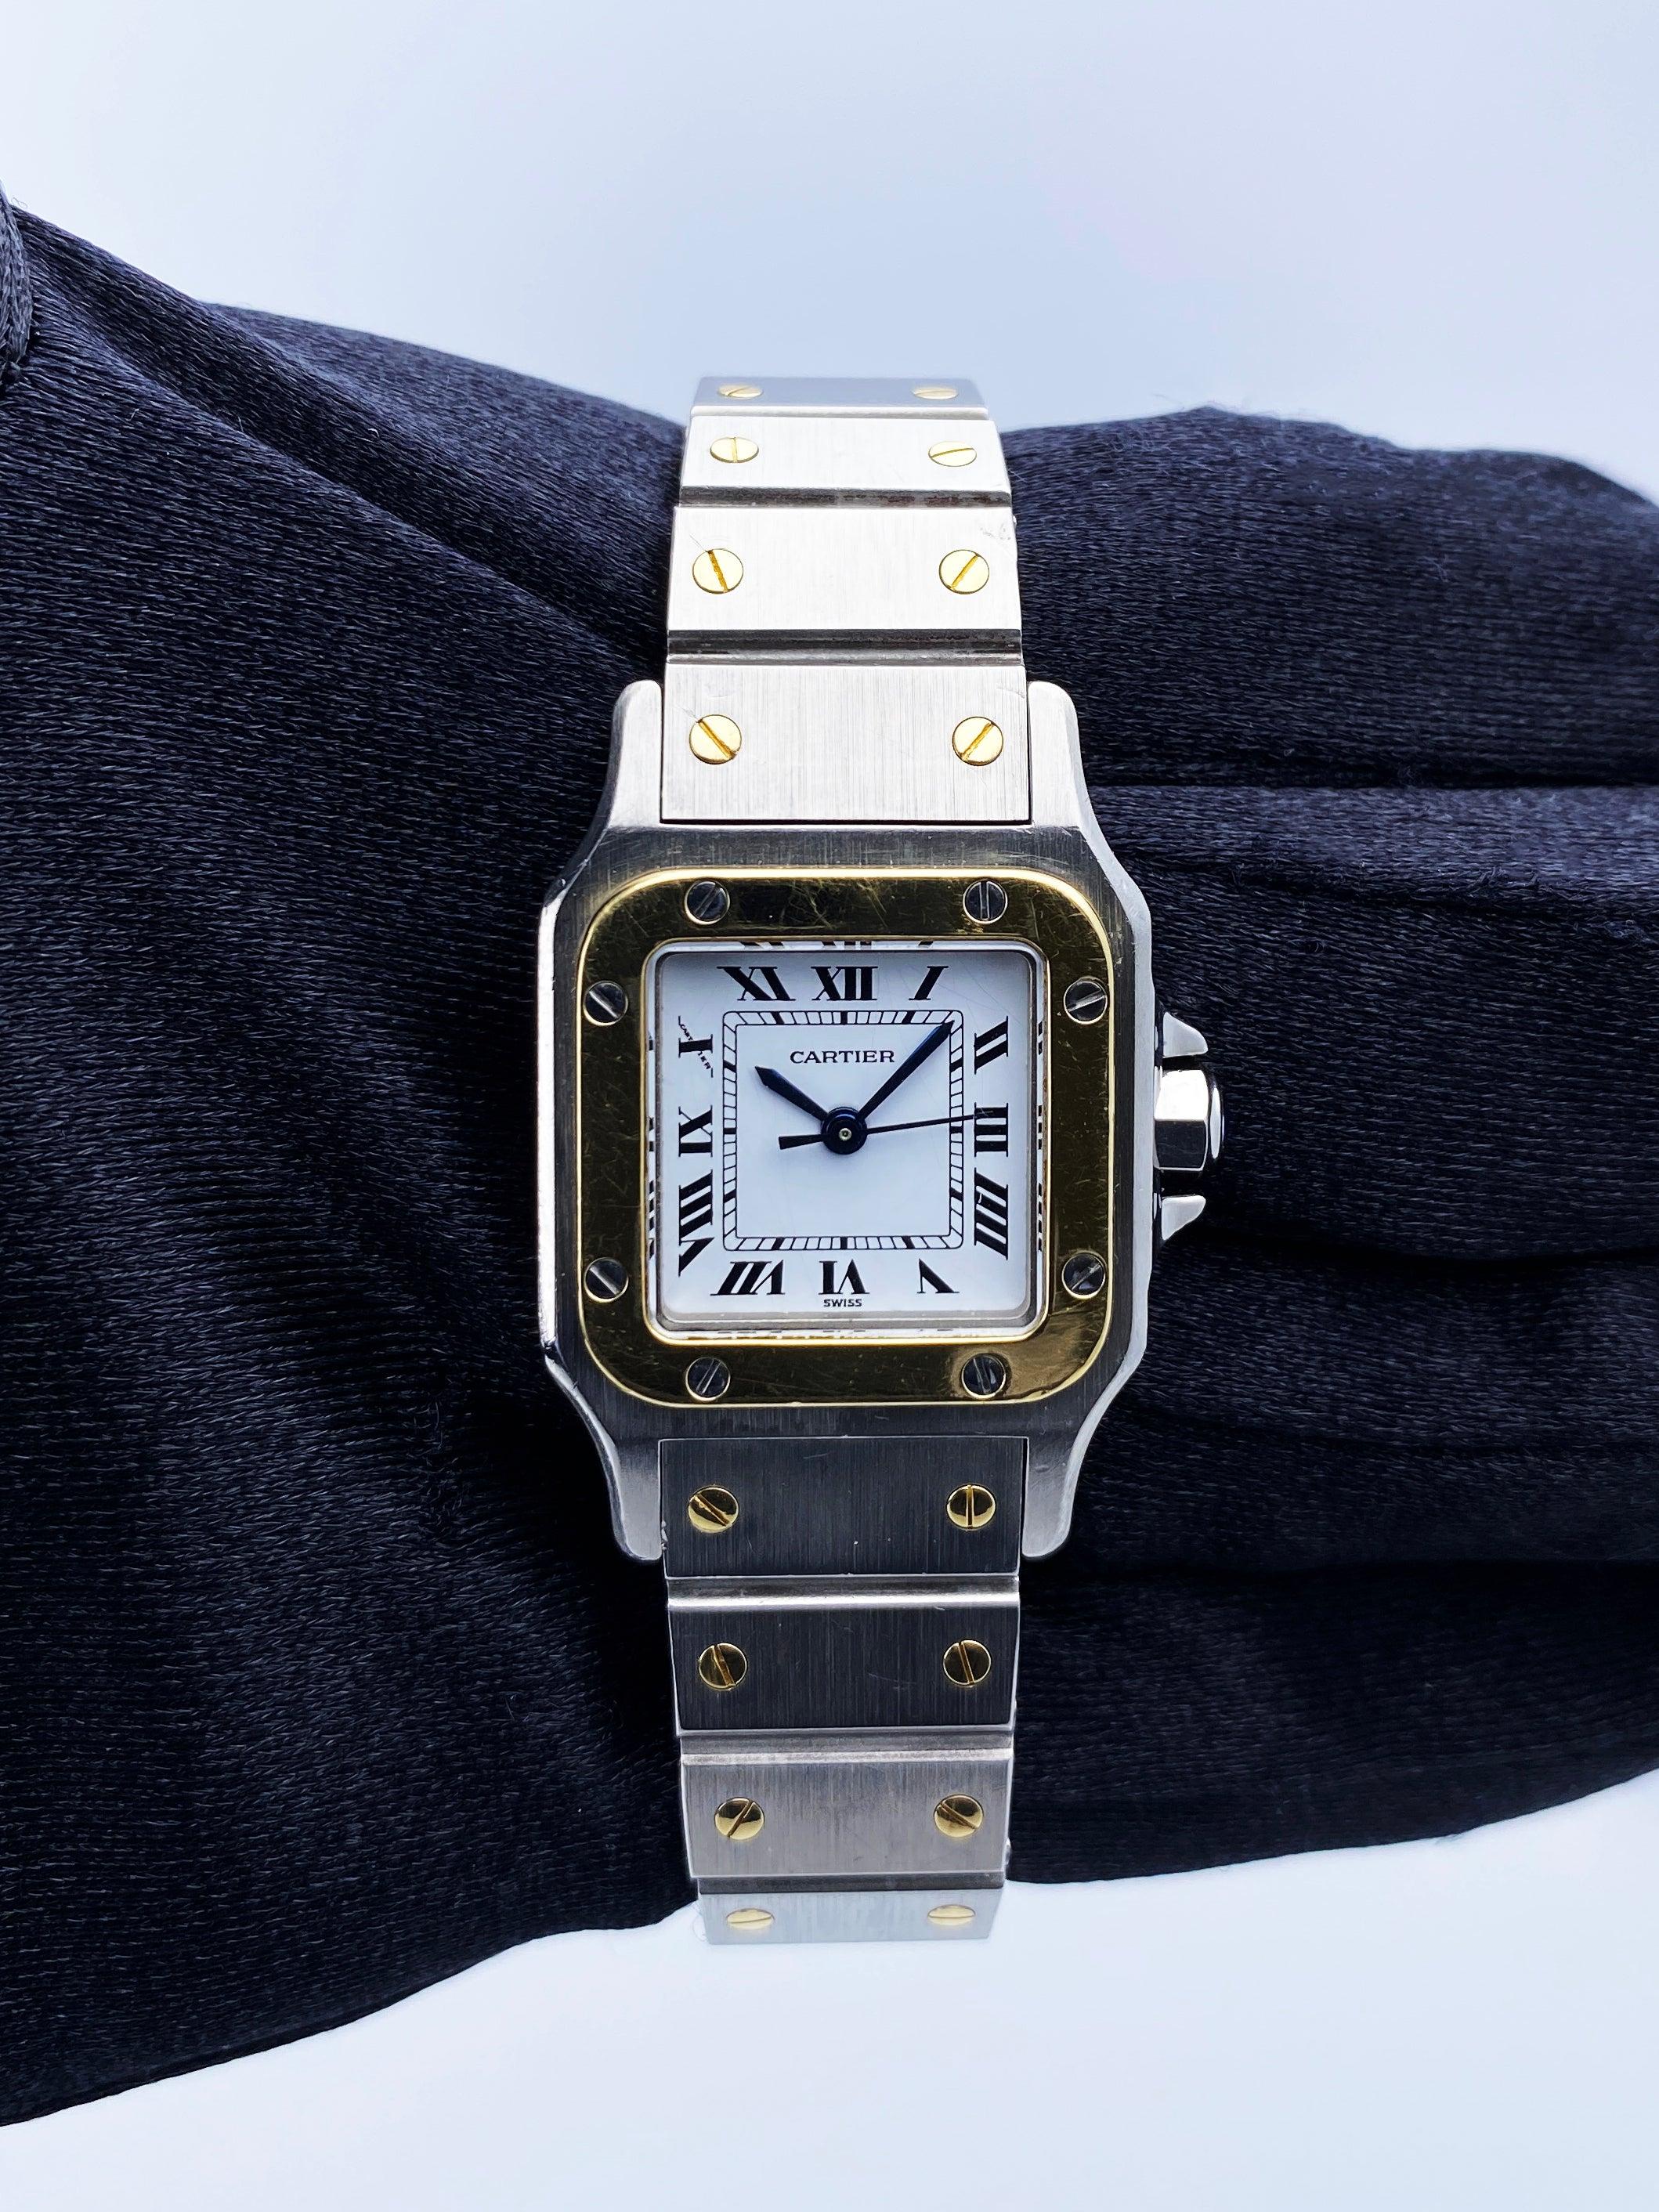 Cartier Santos Galbee 0902 Ladies Watch. 24mm stainless steel case. 18K yellow gold fixed bezel. White dial with blue hands and Roman numeral hour marker. Minute marker on the inner dial. 18K yellow gold and stainless steel bracelet with fold over